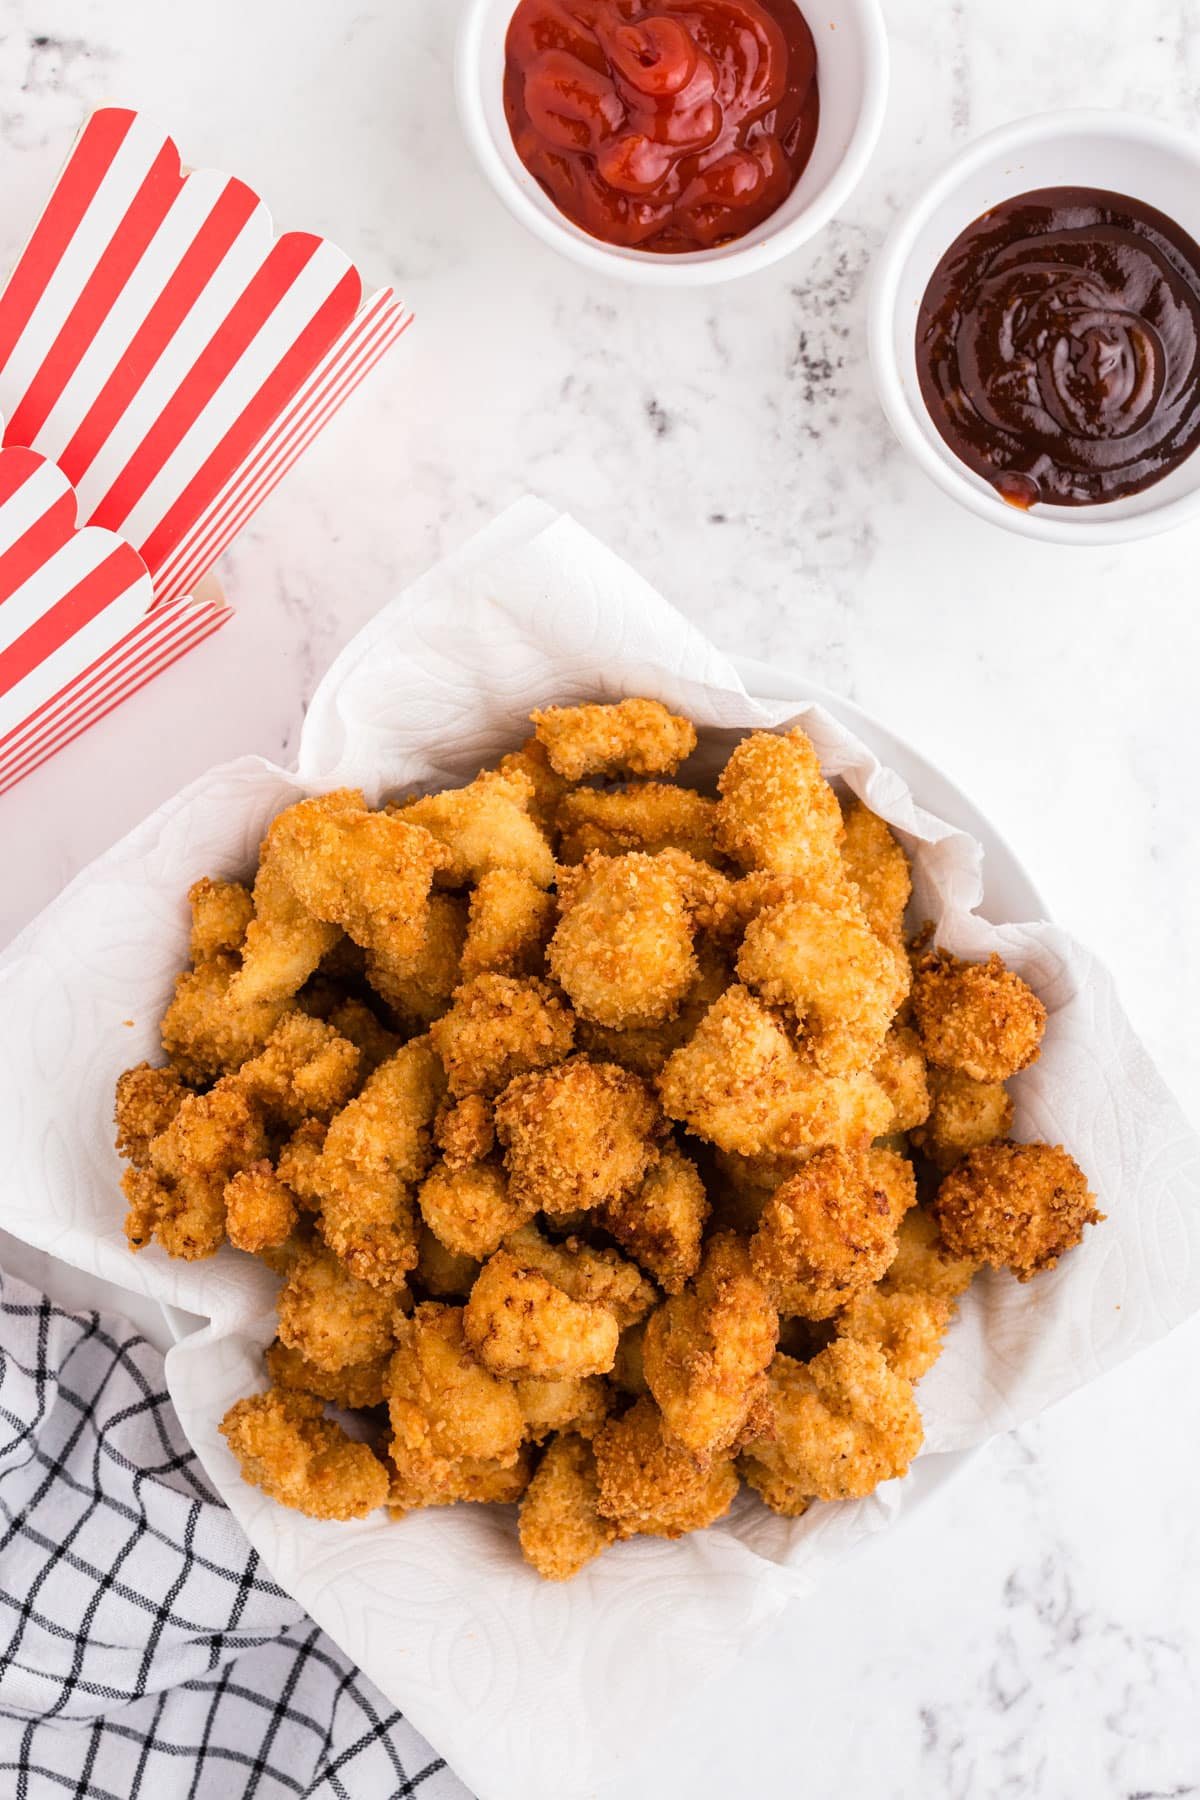 Overhead view of popcorn chicken with bowls of dipping sauce.